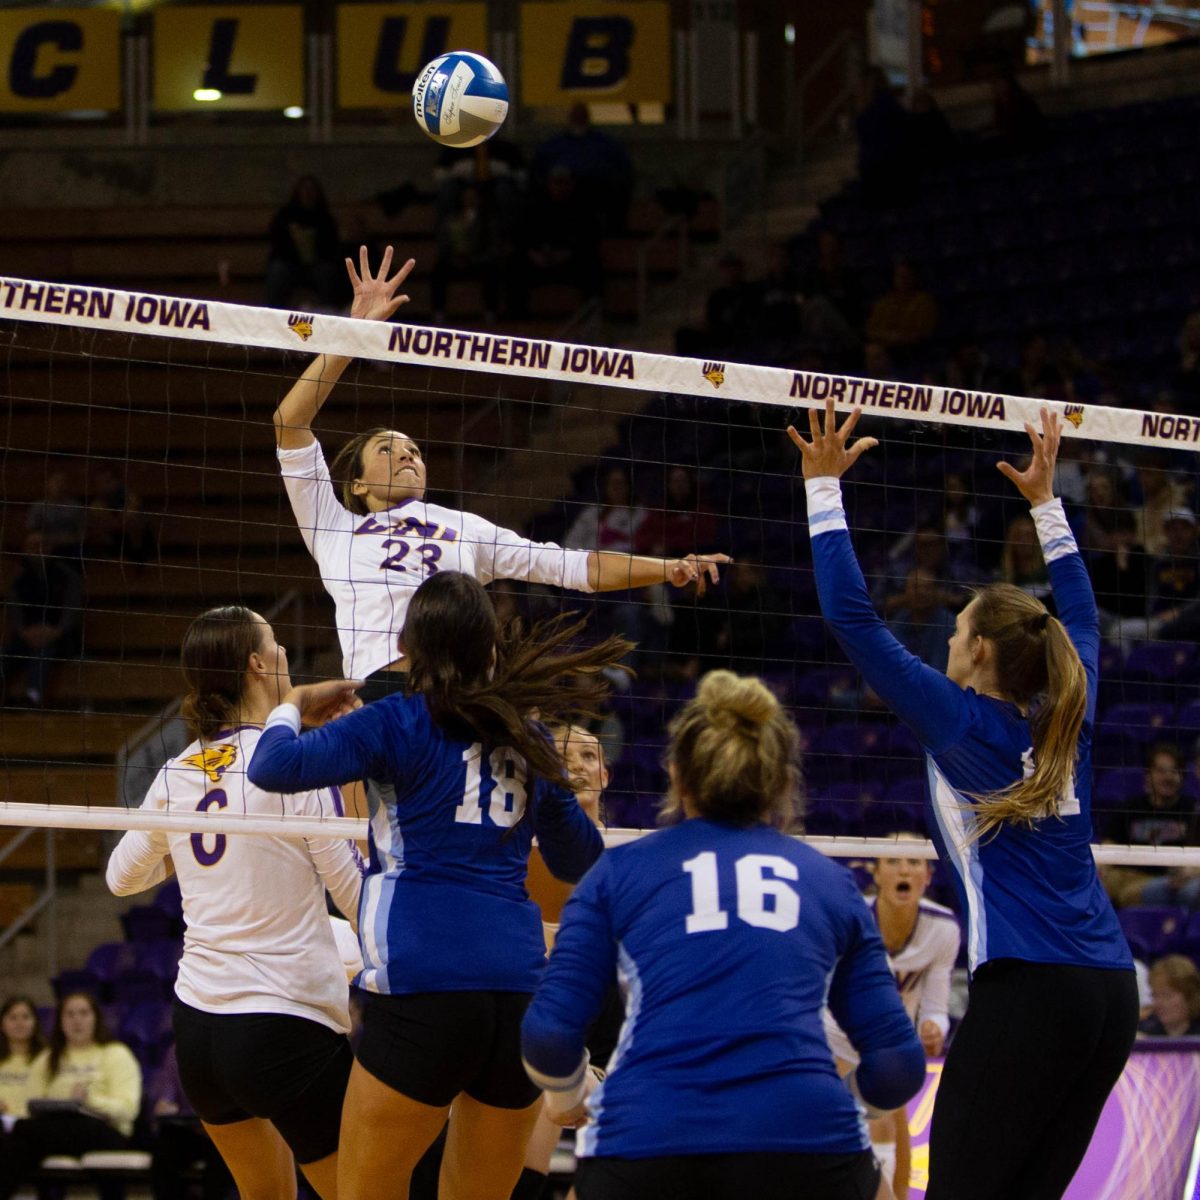 Layanna Green delivers a spike to the Indiana State Sycamores. The Panthers defeated the Sycamores in four
sets.